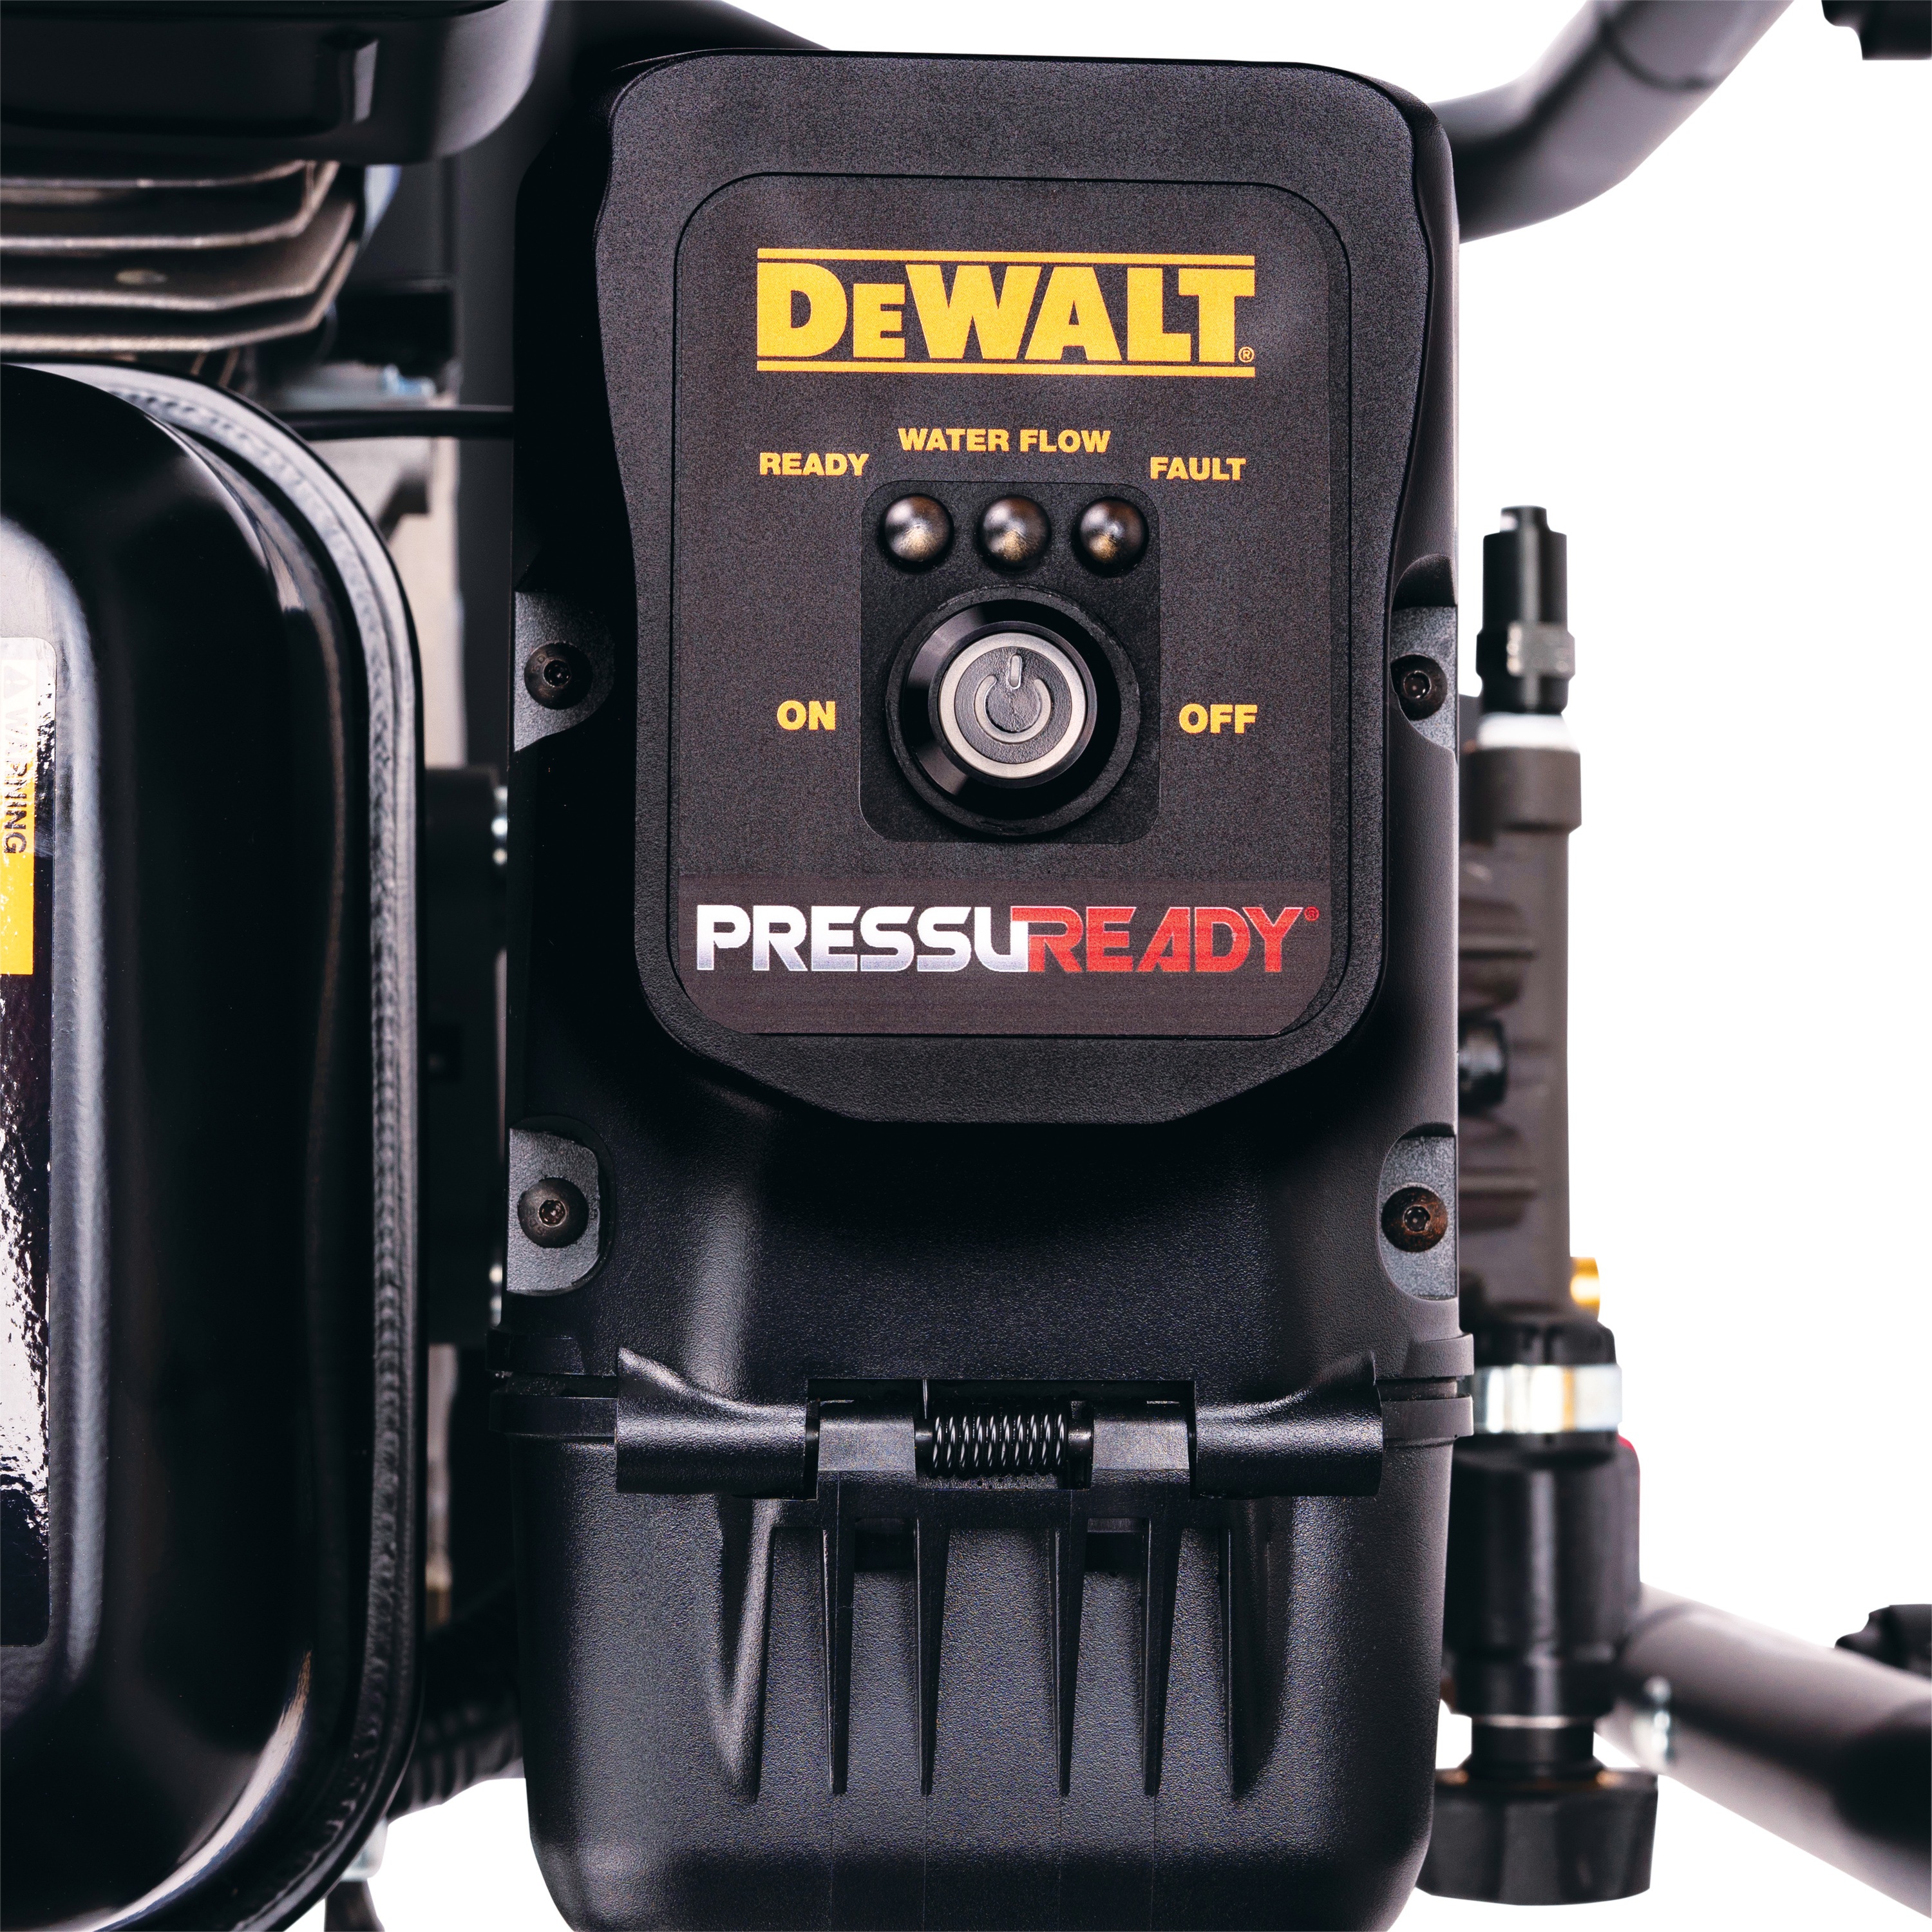 Smart Control panel feature of PressuReady 3400 PSI at 2.5 GPM Powered Cold Water Gas Pressure Washer.